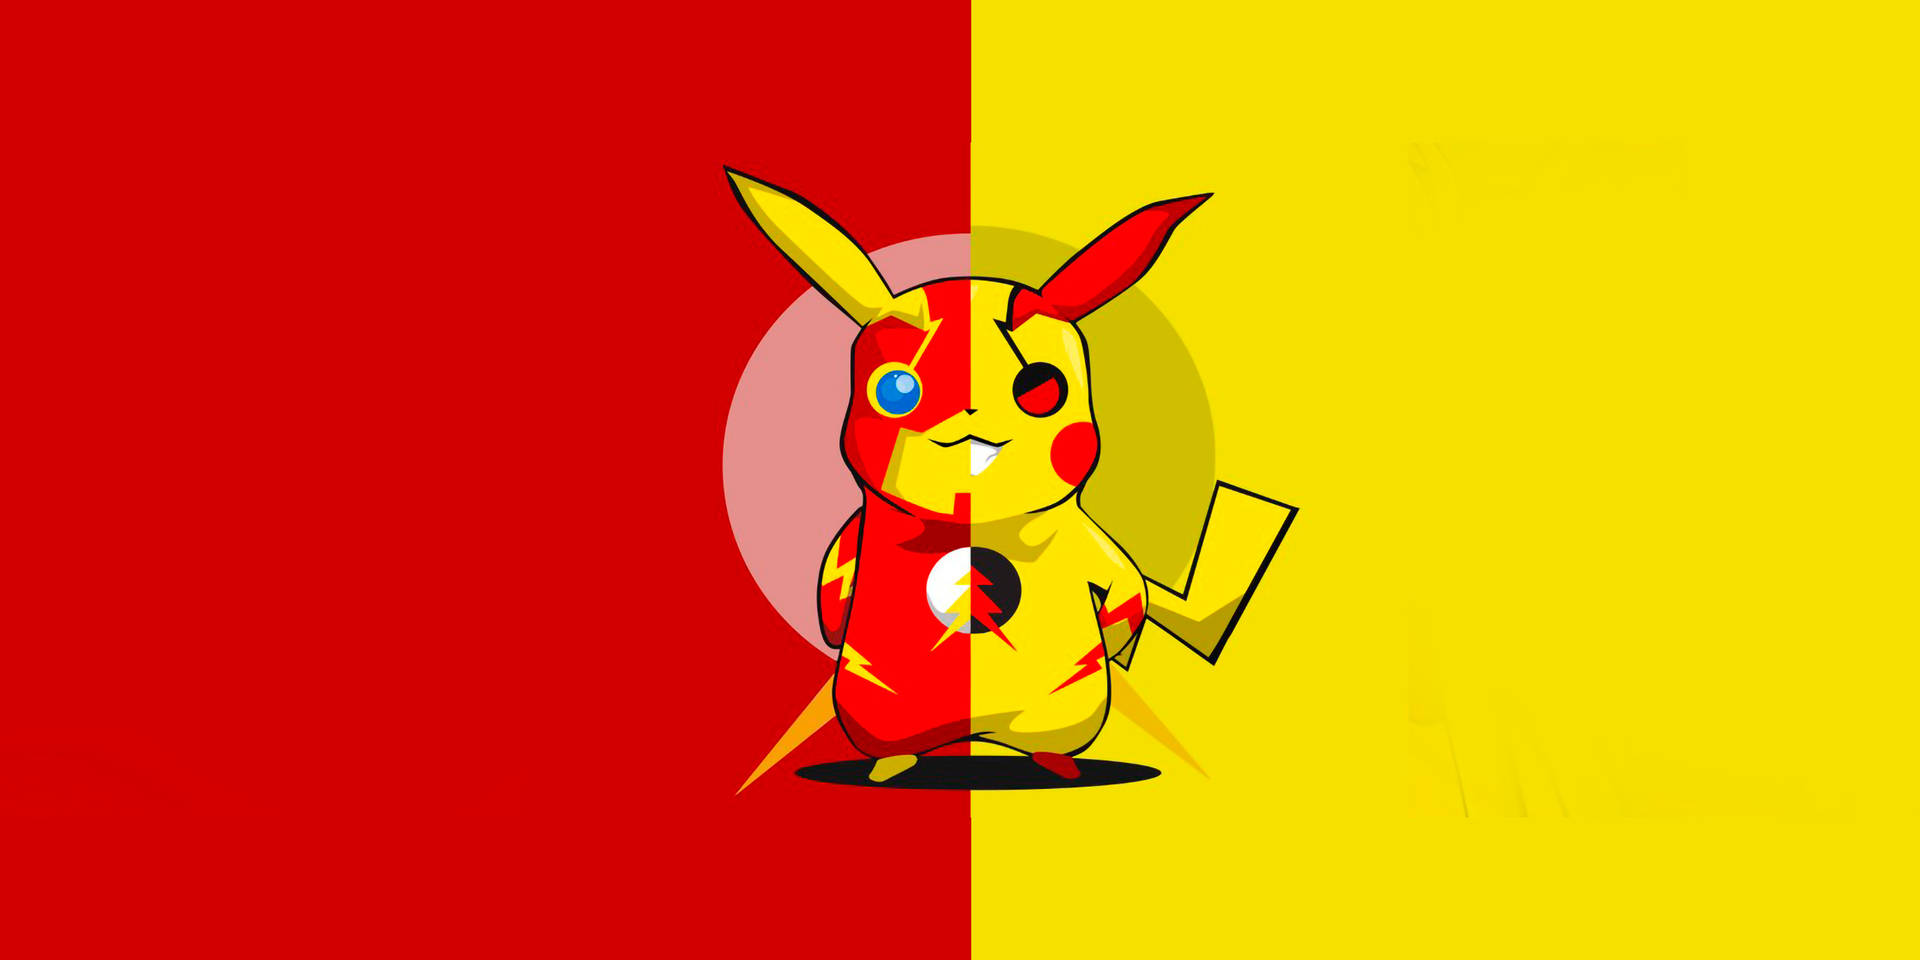 Pikachu In Red And Yellow